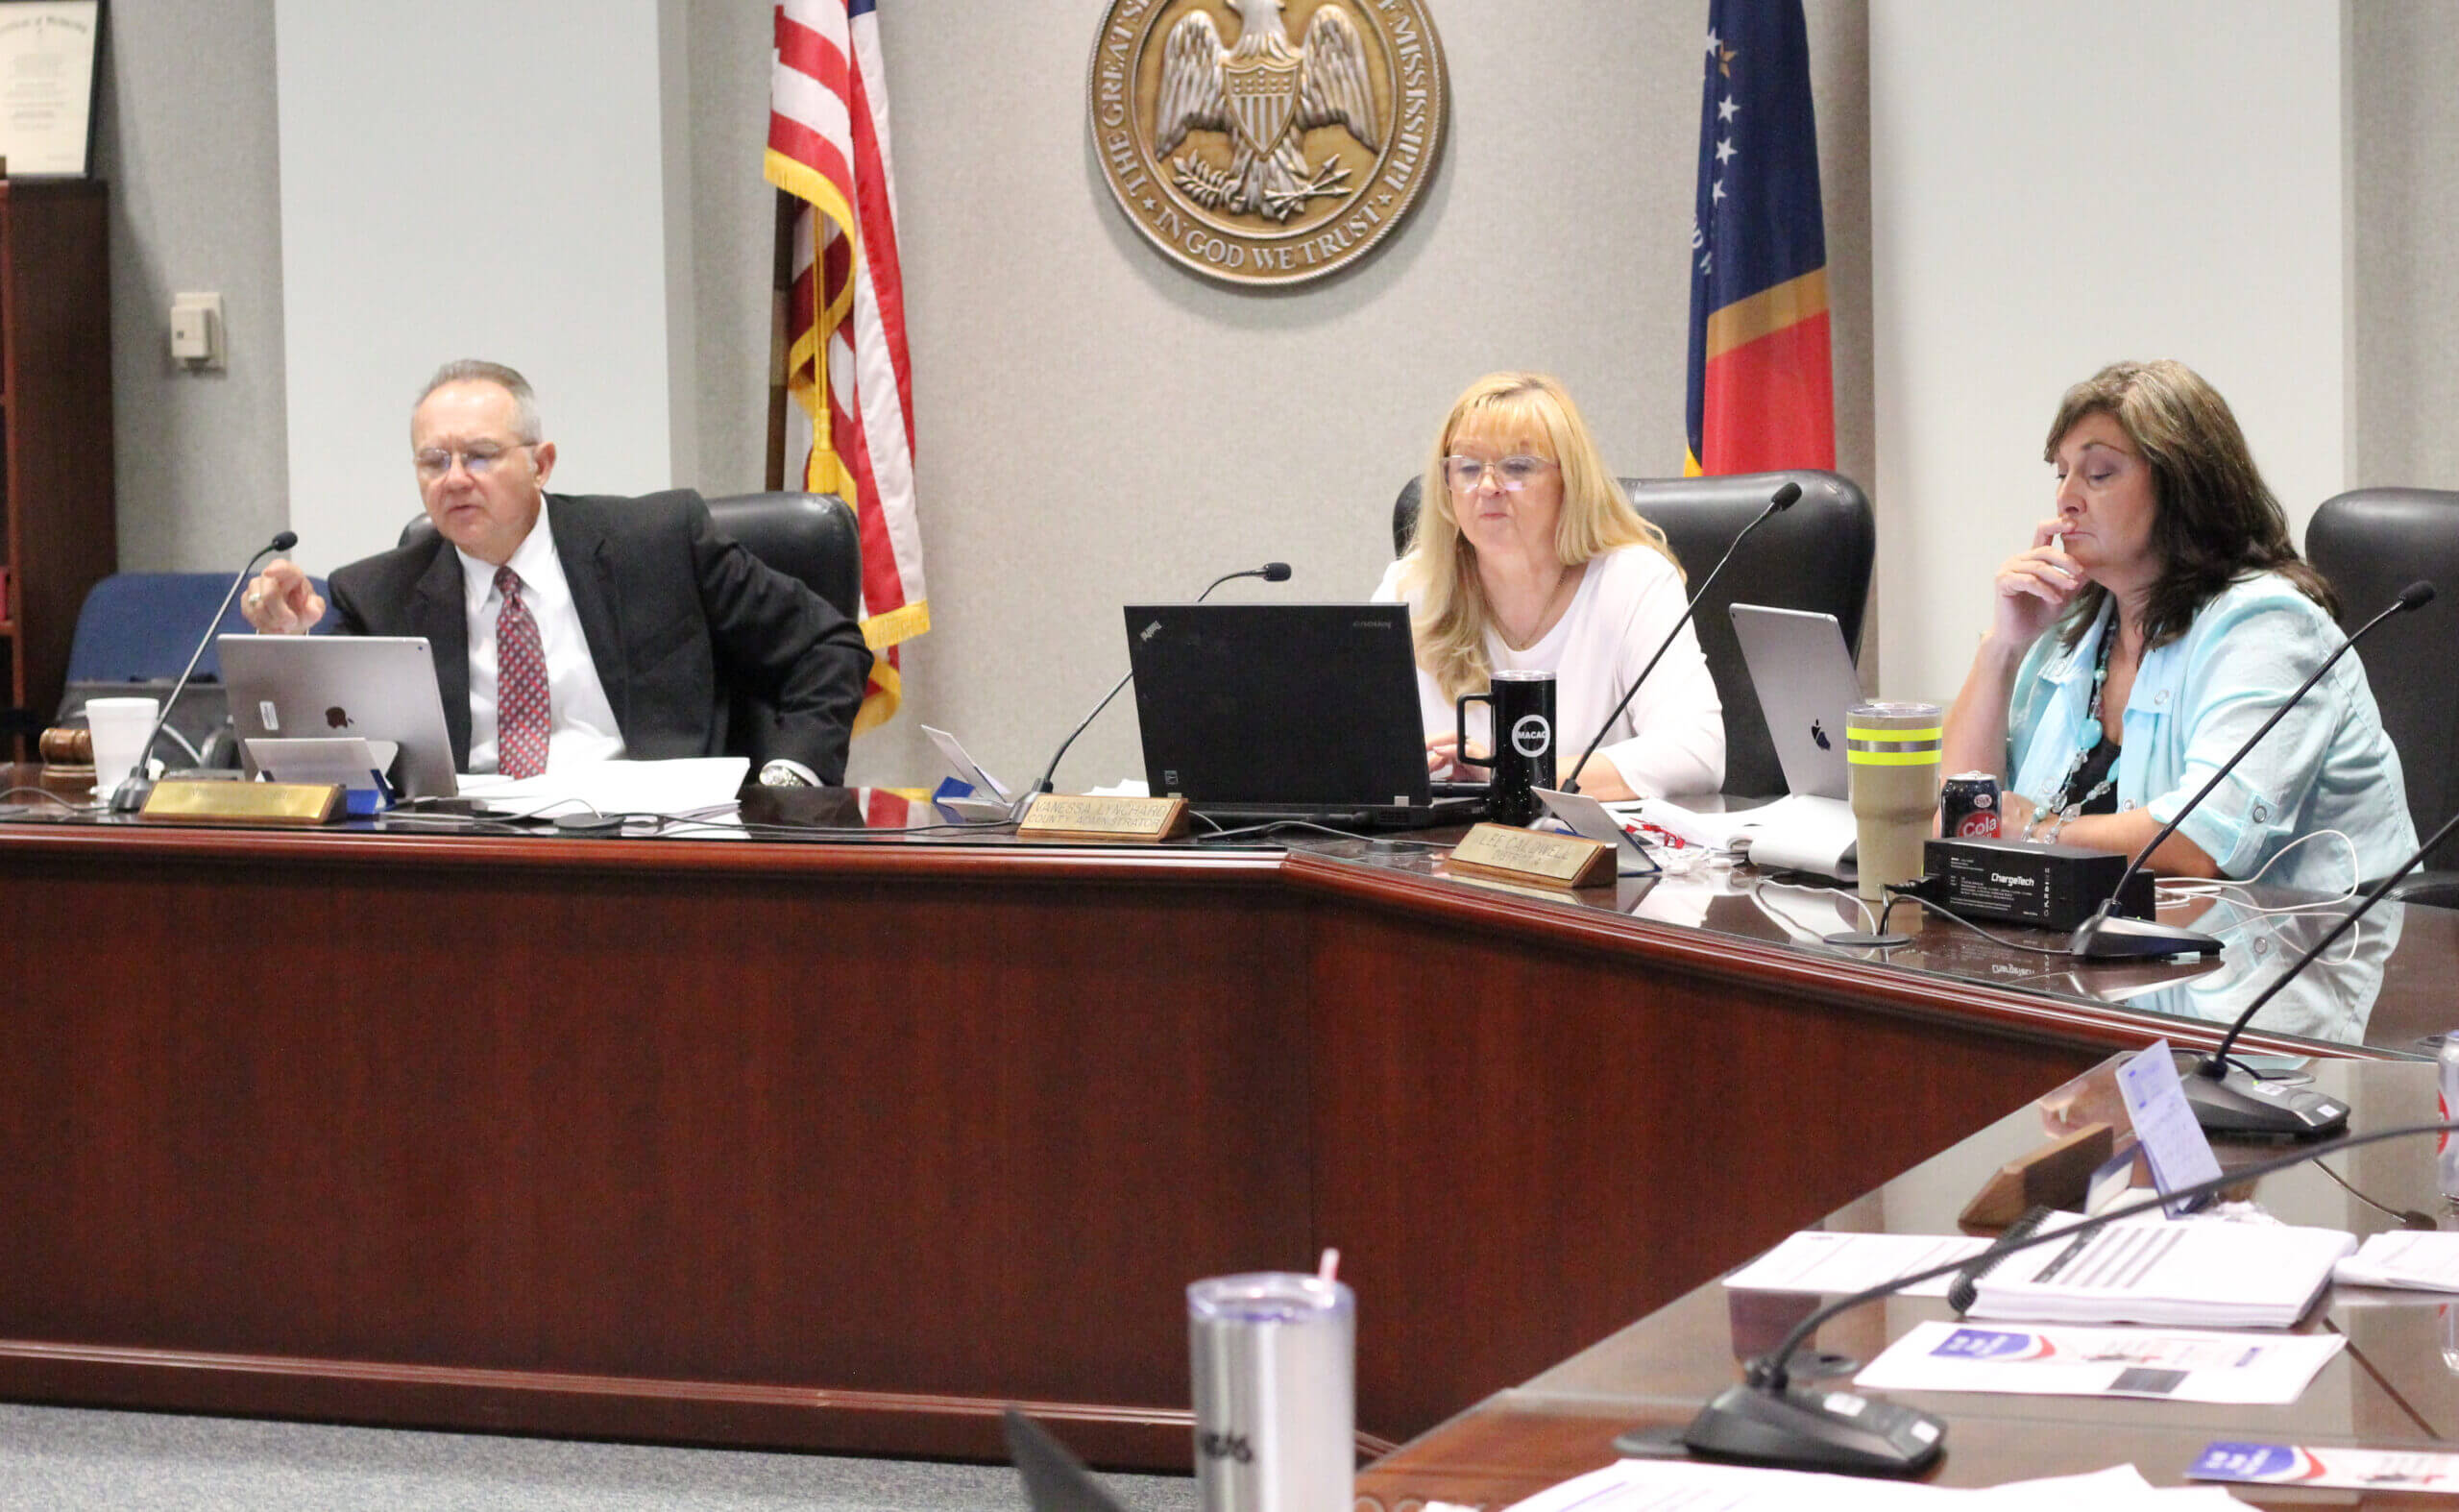 State, county, get COVID updates